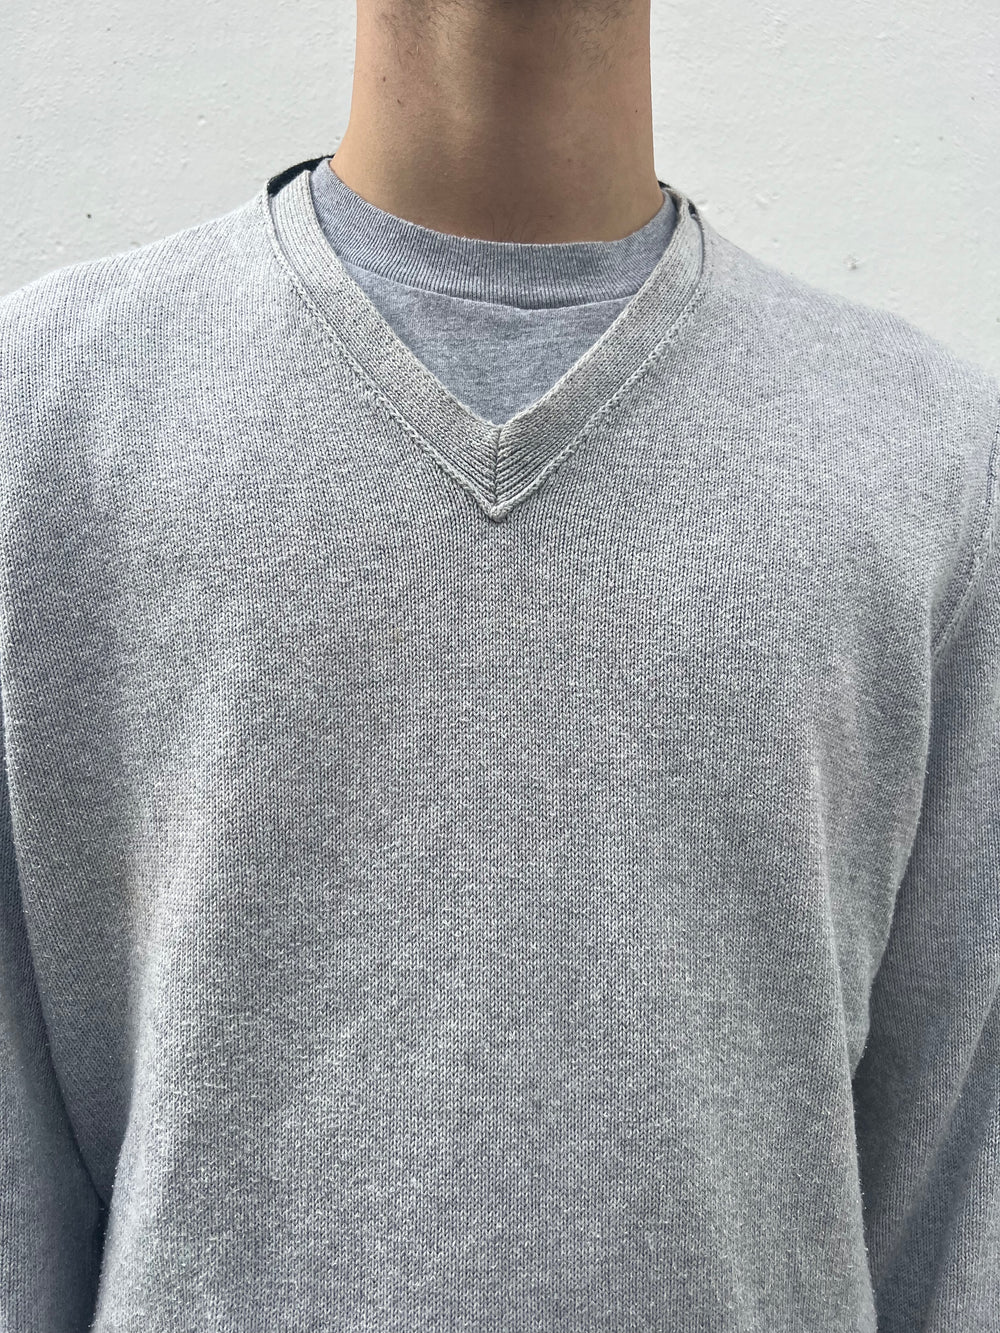 Early 2000s Stone Island Wool V-Neck Knit Sweater (XL)